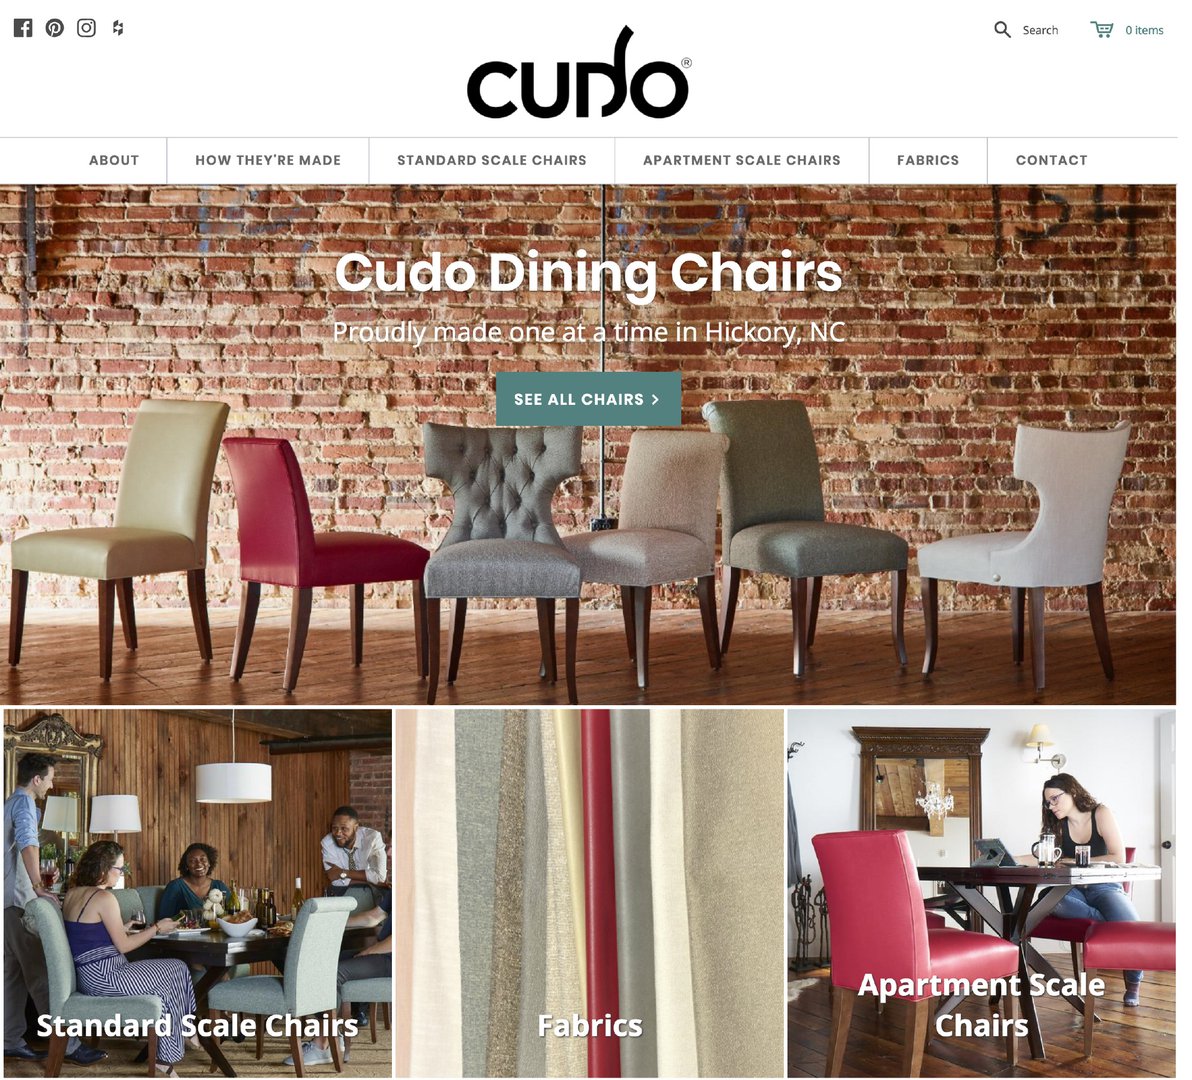 Cudo Dining Chairs Home page